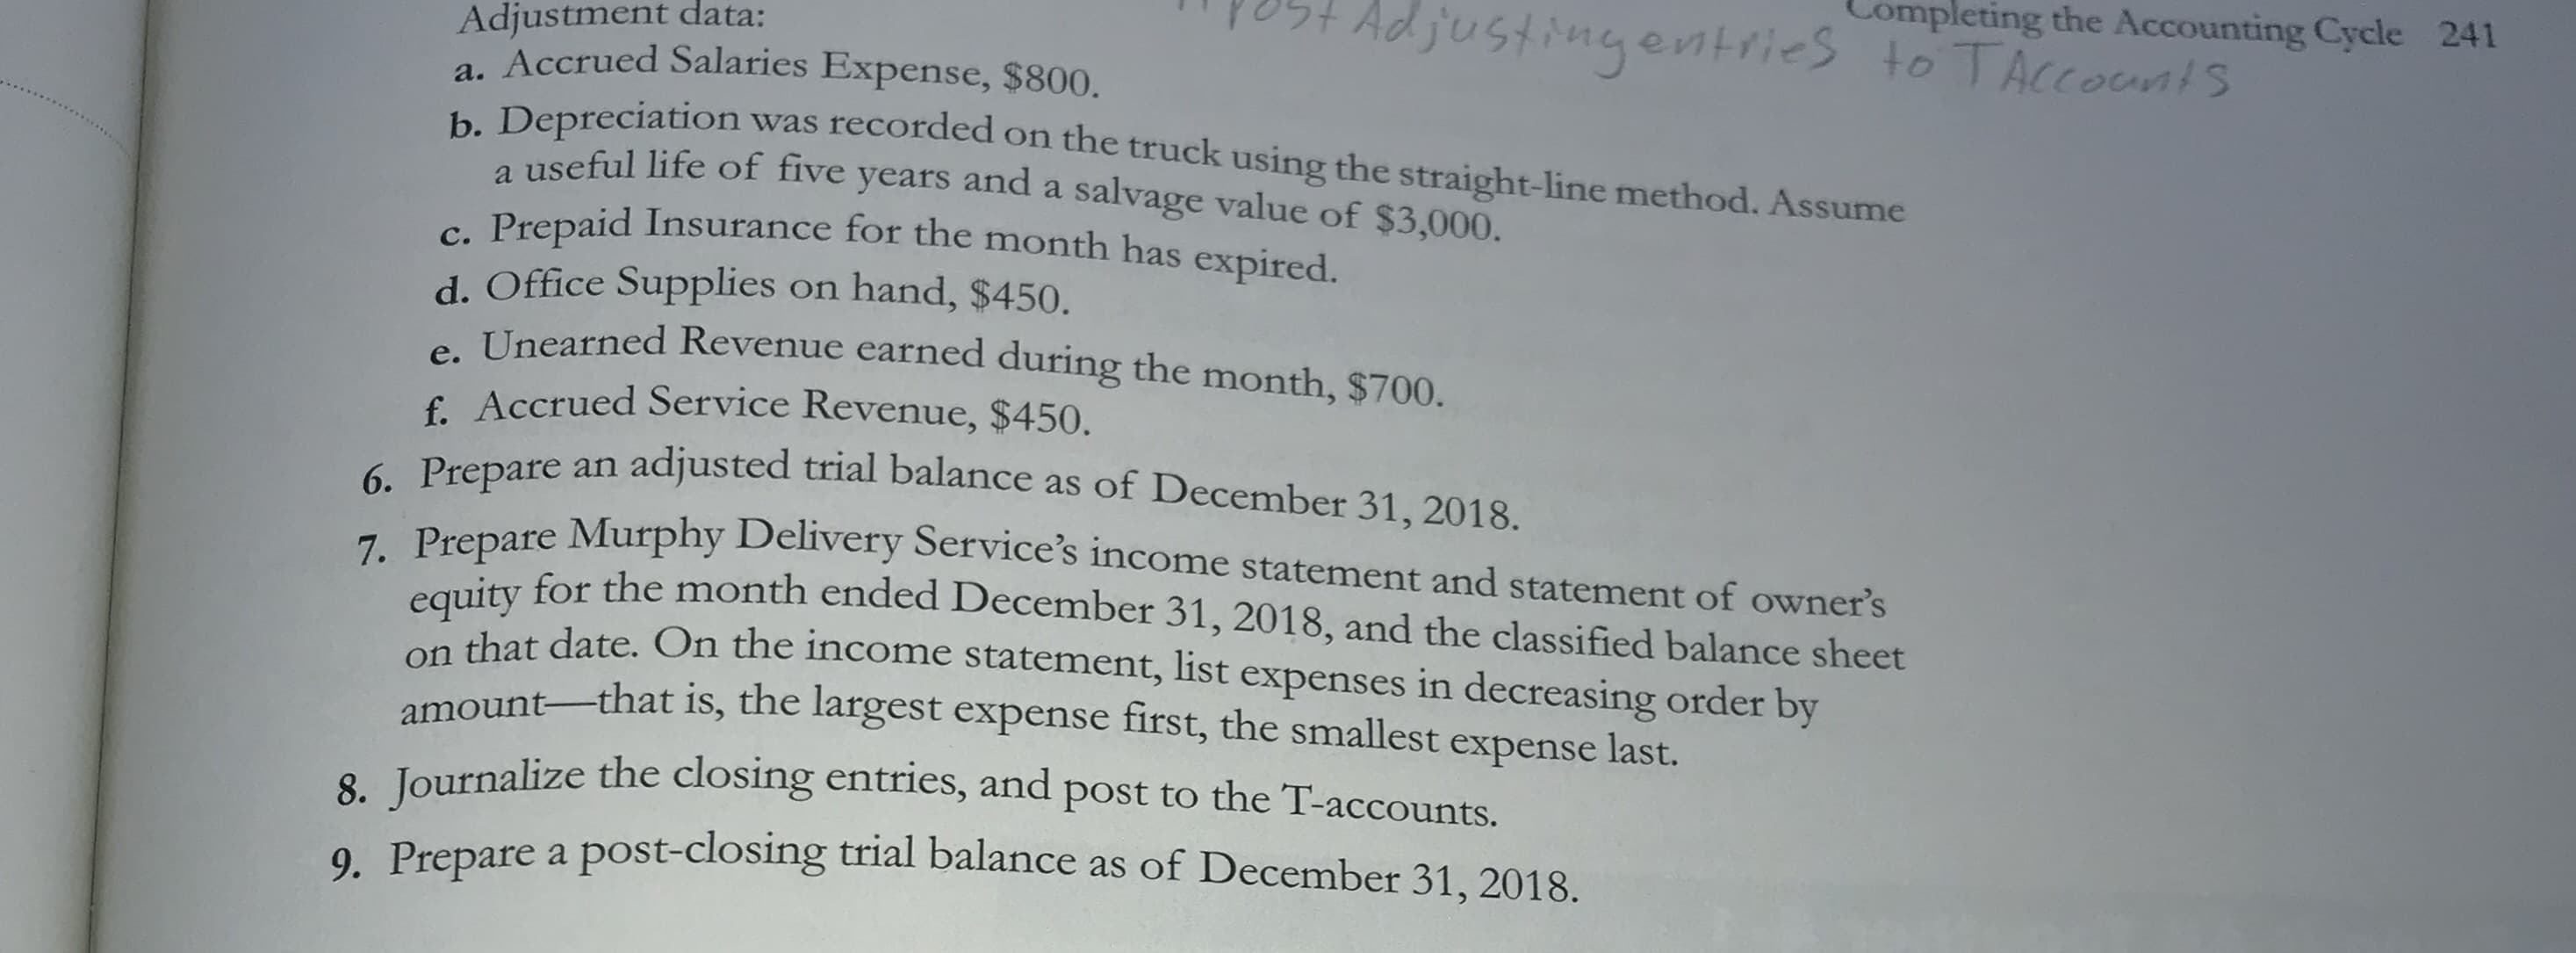 to
a. Accrued Salaries Expense, $800.
. Depreciation was recorded on the truck using the straight-line method. Assume
a useful life of five years and a salvage value of $3,000.
e Prepaid Insurance for the month has expired.
d. Office Supplies on hand, $450.
Unearned Revenue earned during the month, $700.
f. Accrued Service Revenue, $450.
- Prepare an adjusted trial balance as of December 31, 2018.
Prepare Murphy Delivery Service's income statement and statement of owner's
ity for the month ended December 31, 2018, and the classified balance sheet
that date. On the income statement, list expenses in decreasing order by
amount-that is, the largest expense first, the smallest e
expense last.
8. Journalize the closing entries, and post to the T-accounts.
9. Prepare a post-closing trial balance as of December 31, 2018.
